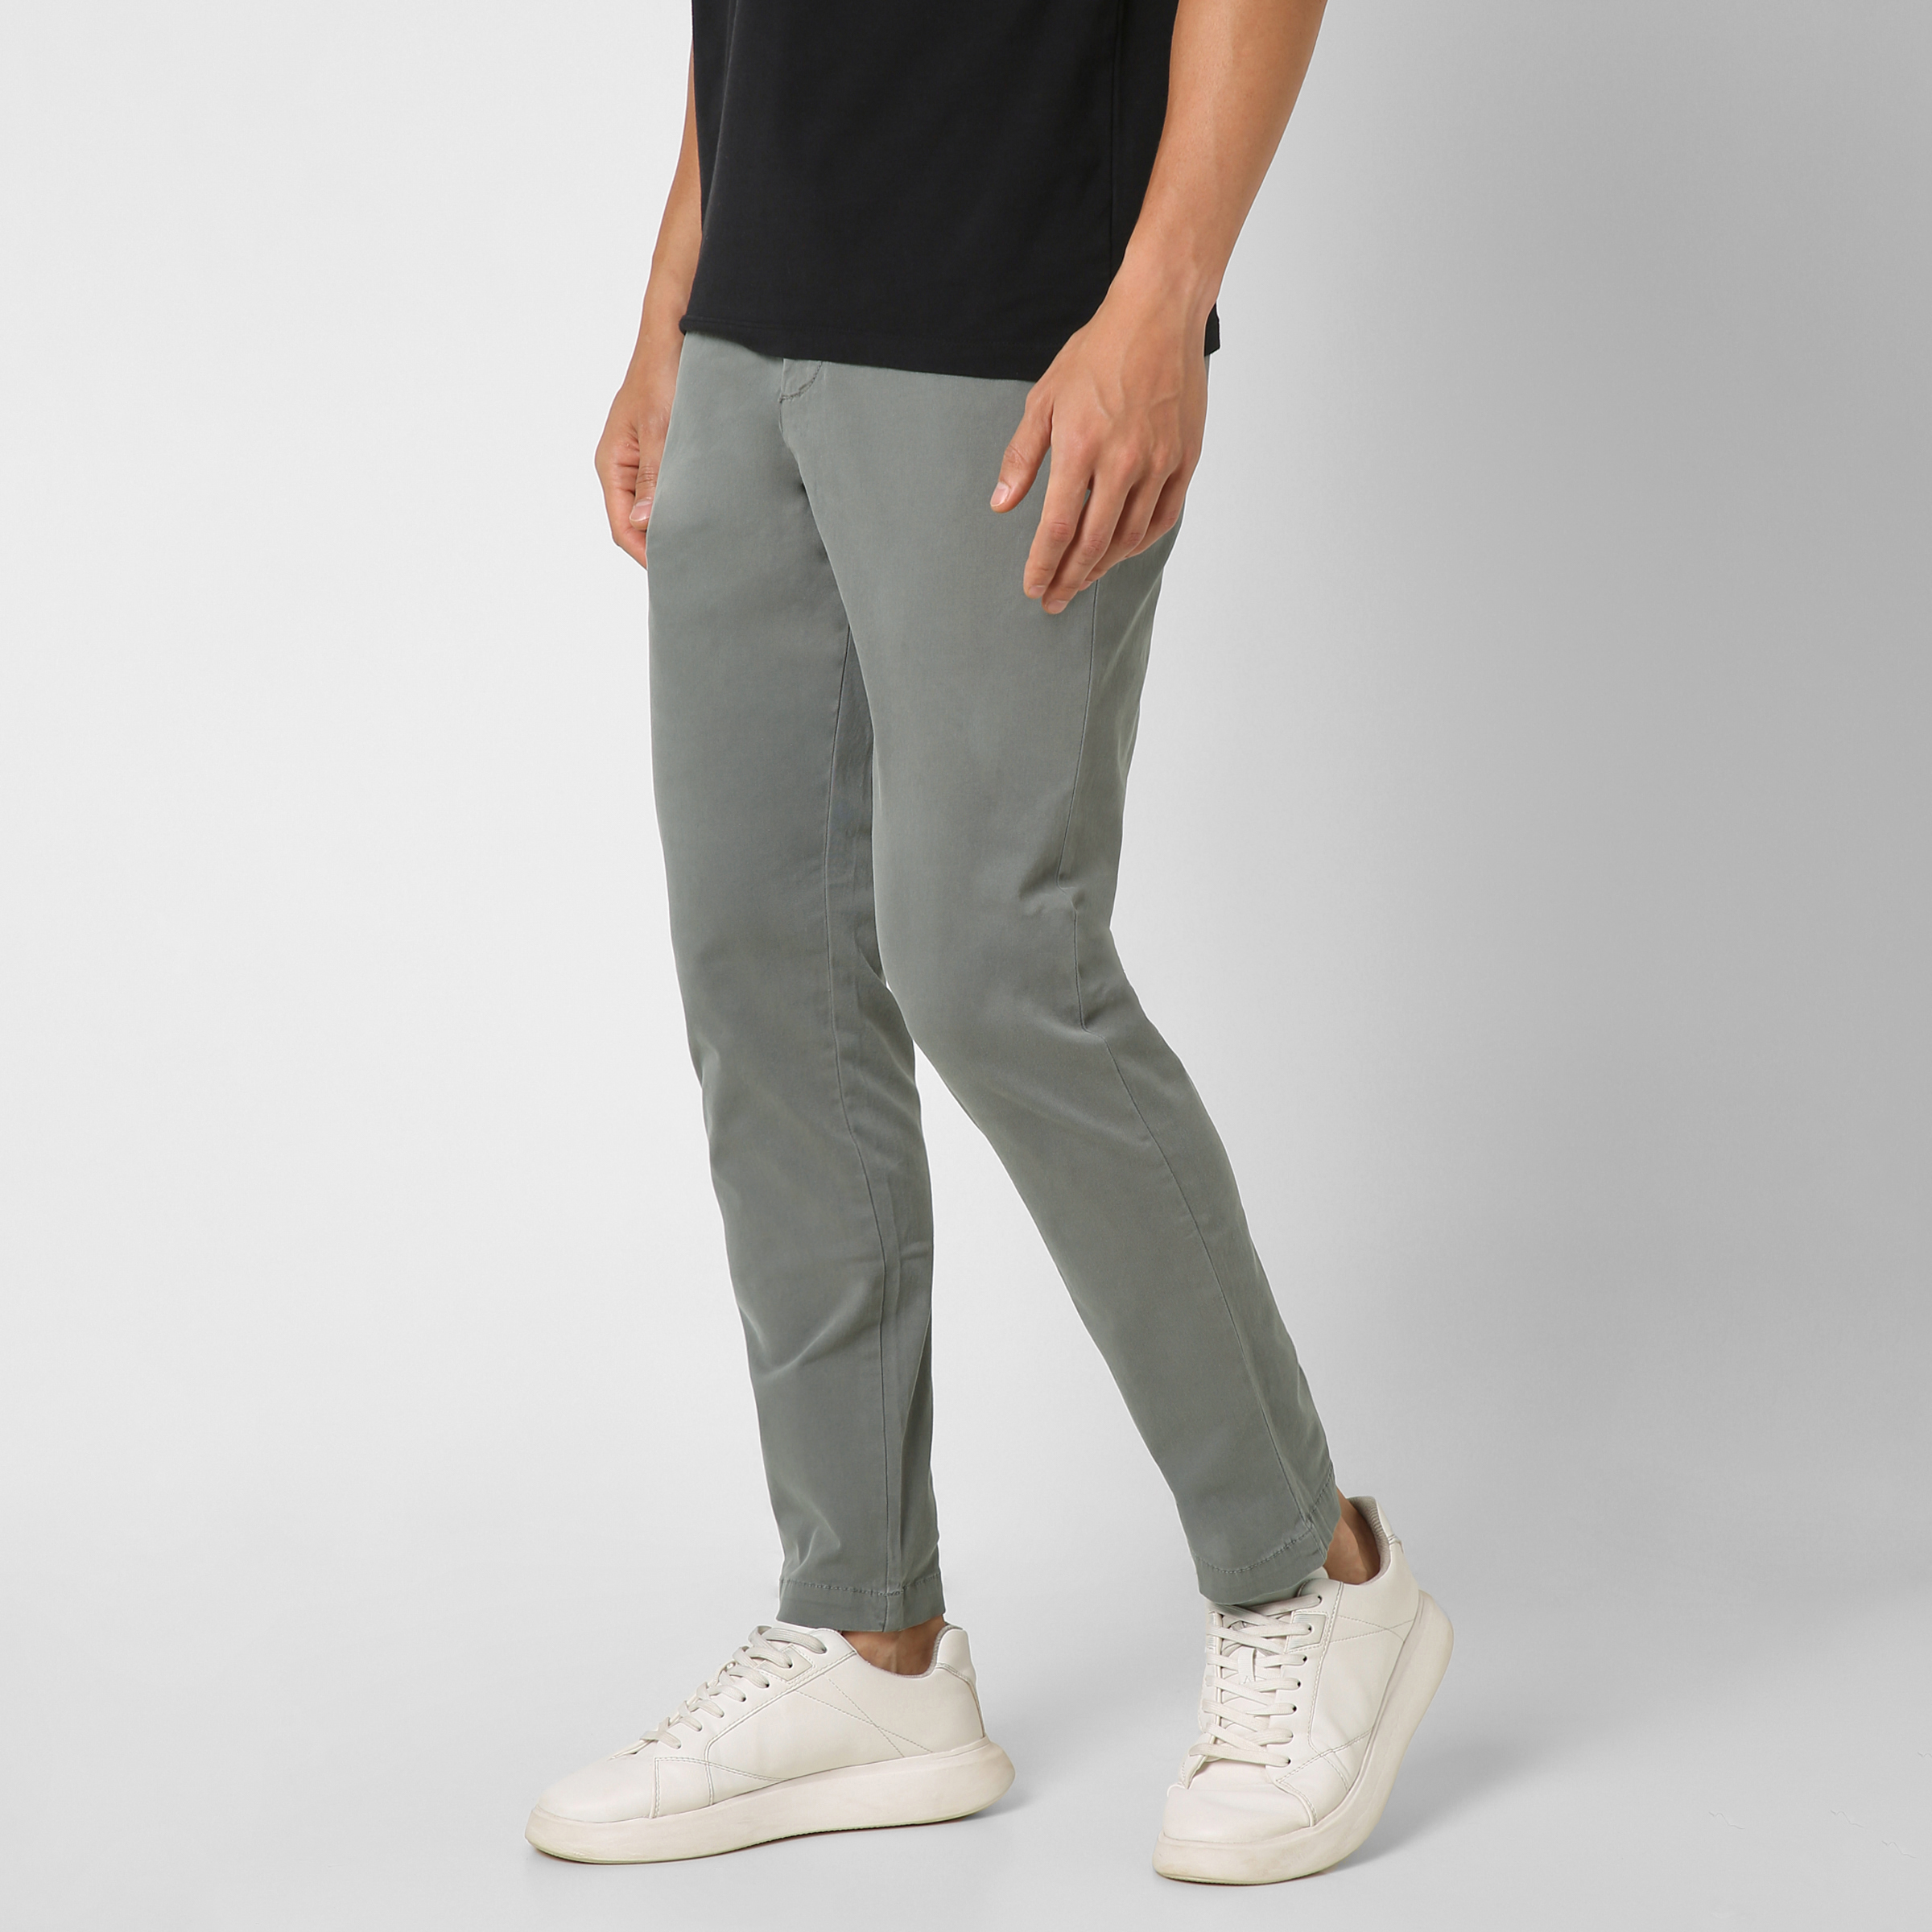 Stretch Chino Pant Grey side on model